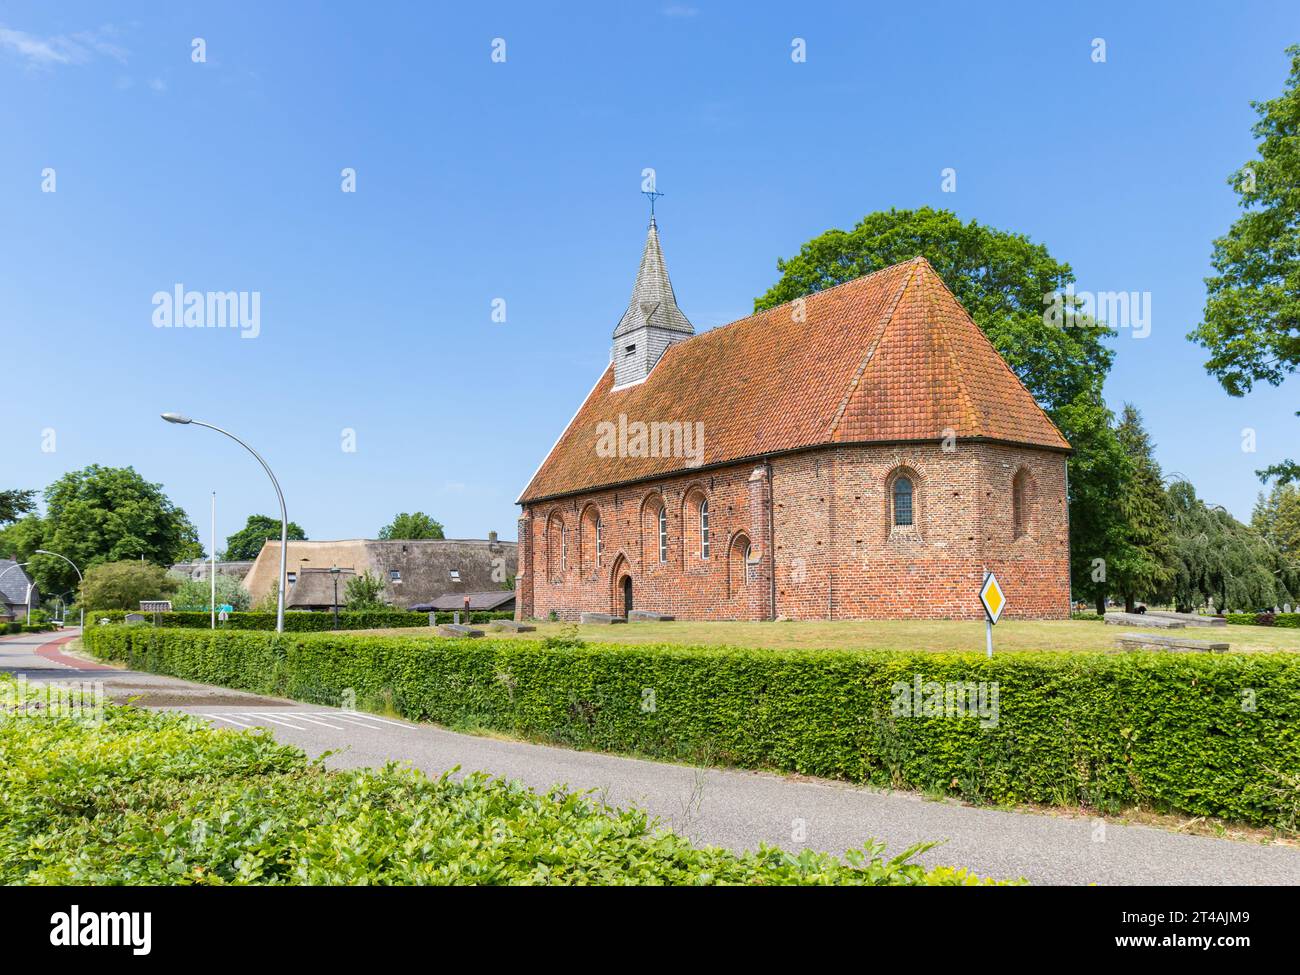 Historic church in small village Zweeloo, Netherlands Stock Photo